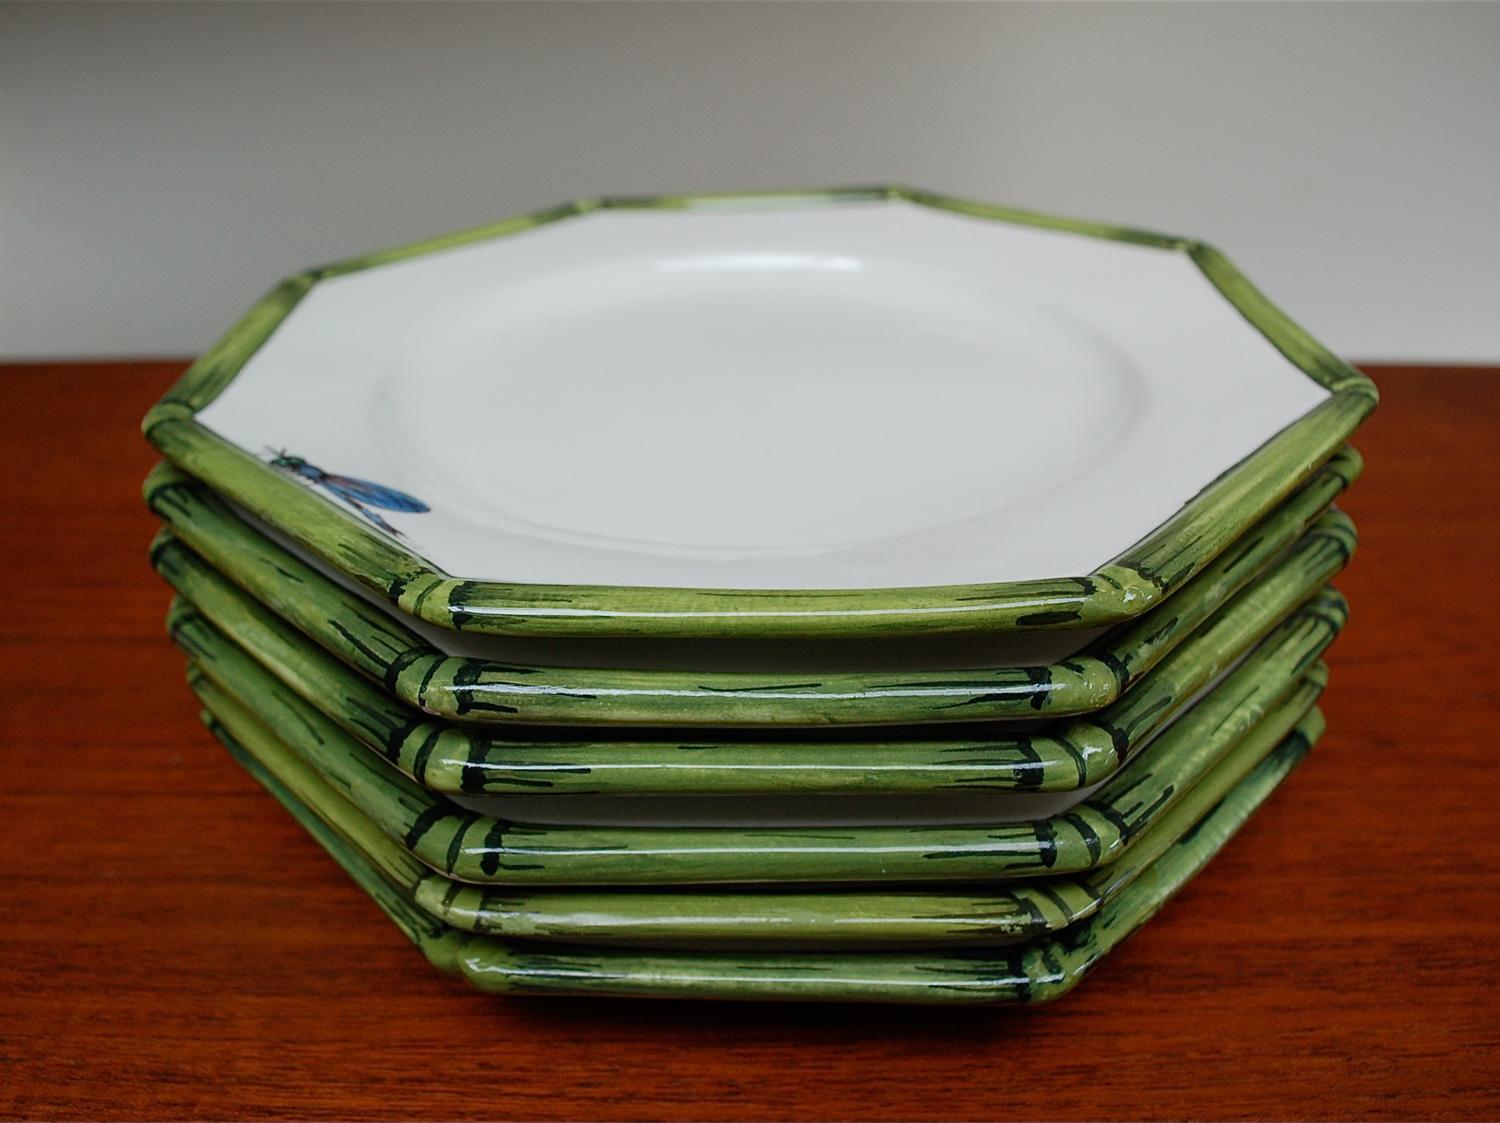 Italian Vintage COSTA Desert Plates with Bamboo and Dragonfly Decoration, 1970s, Italy For Sale